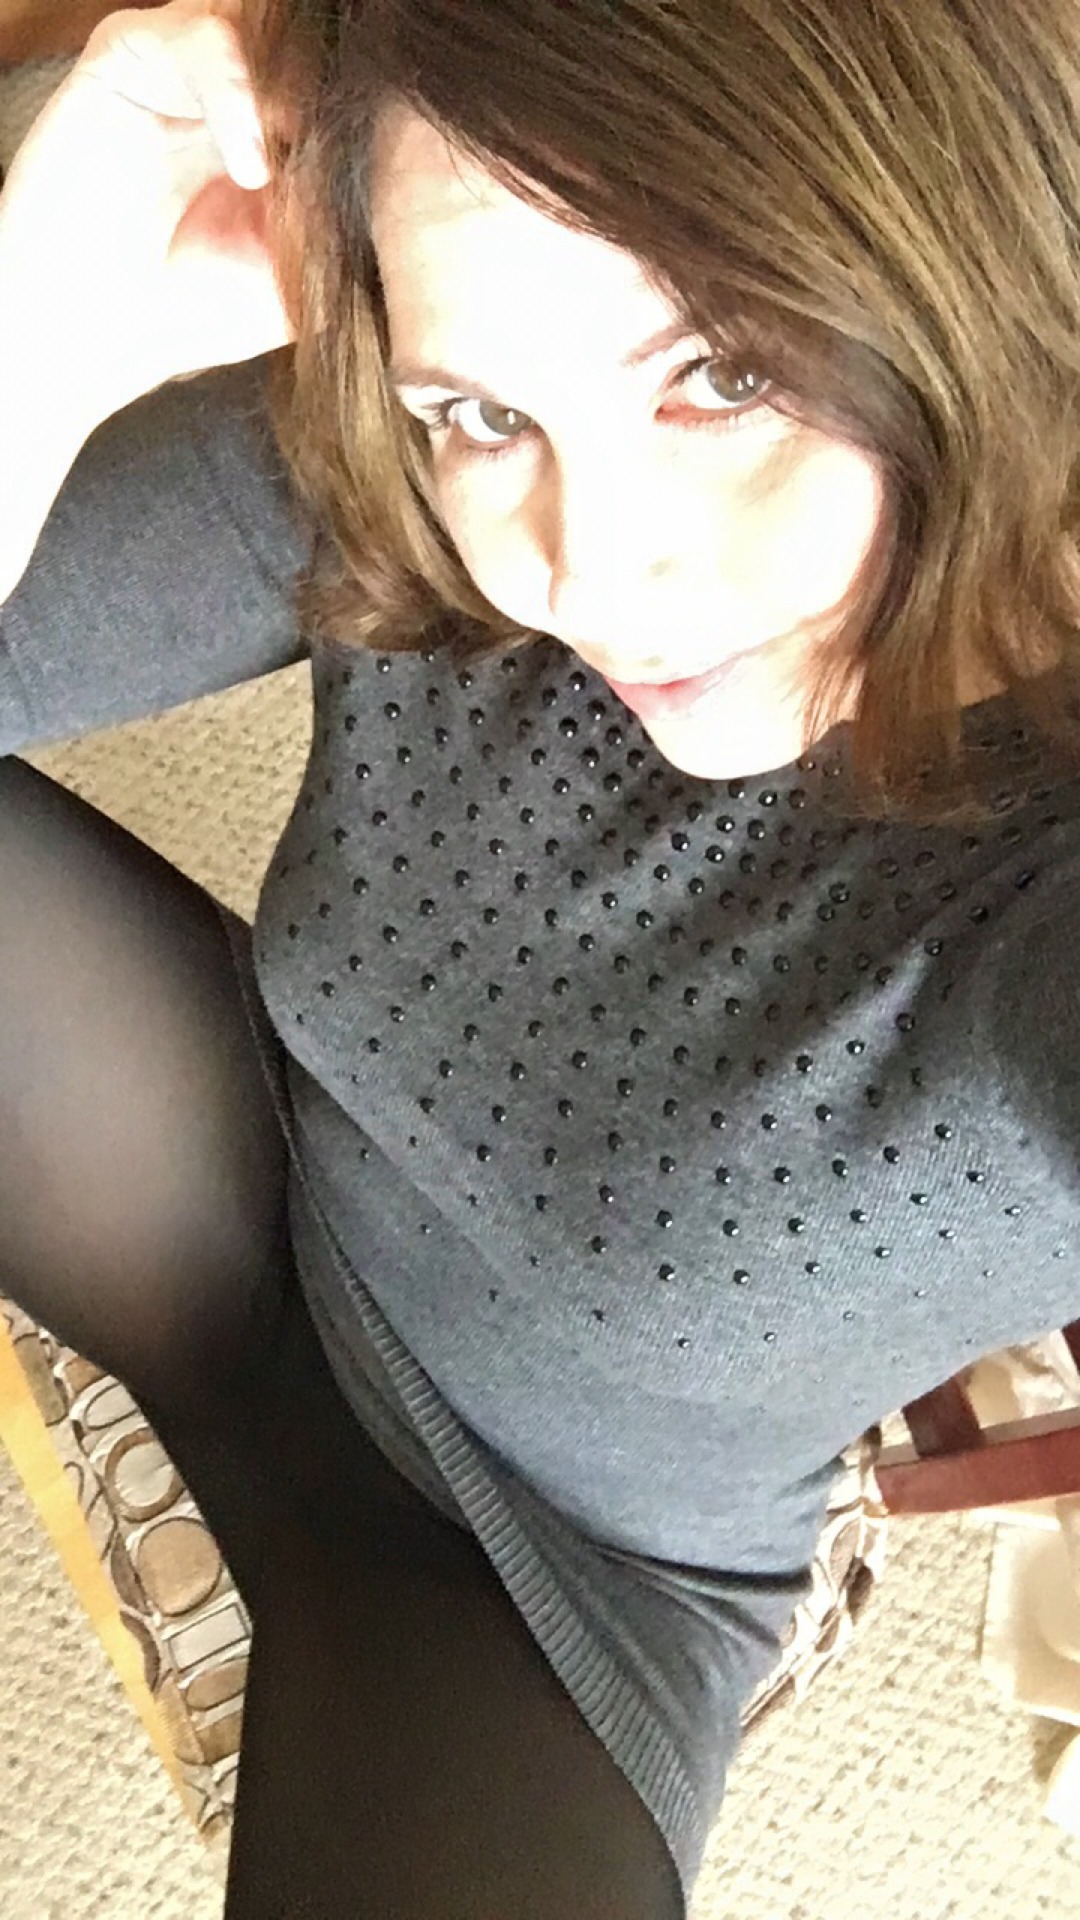 mr-violetclair71: mrs-violetclair70:  Working from home and chatting with @mr-violetclair71